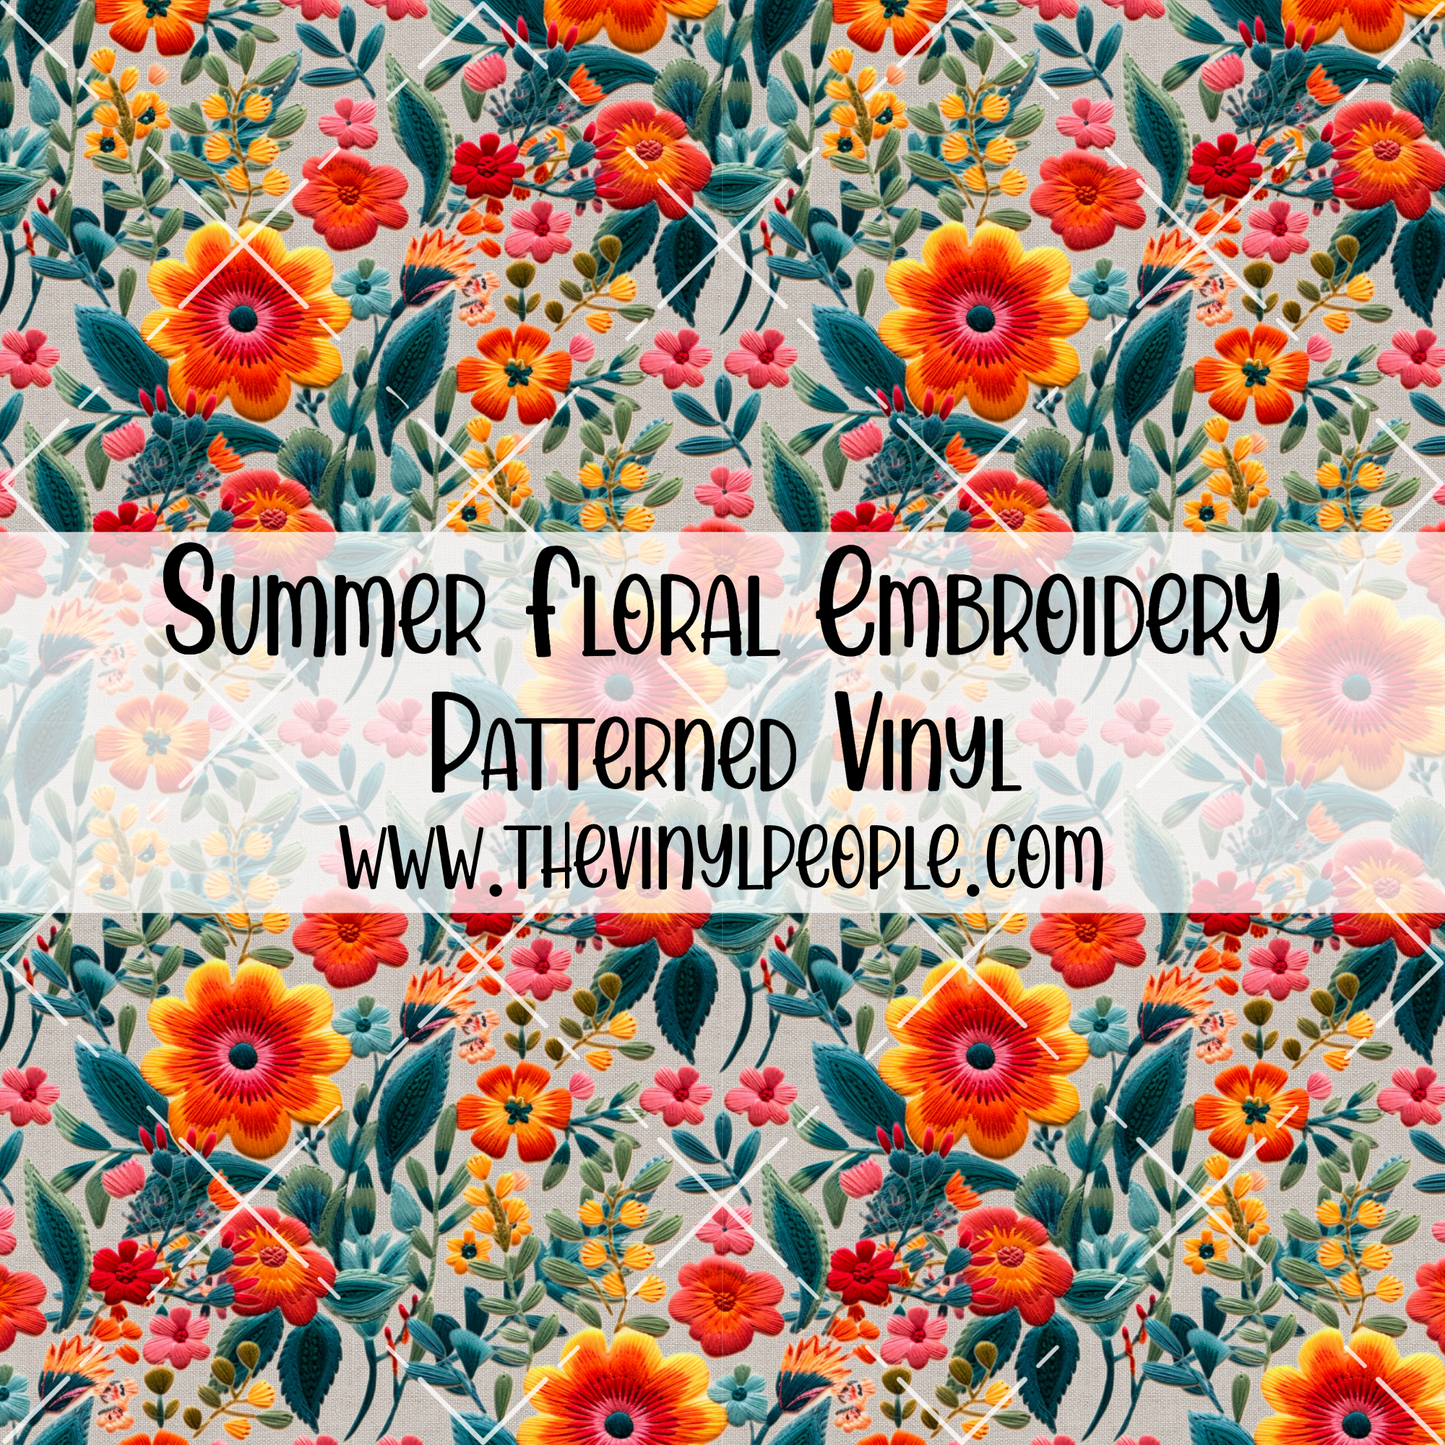 Summer Floral Embroidery Patterned Vinyl